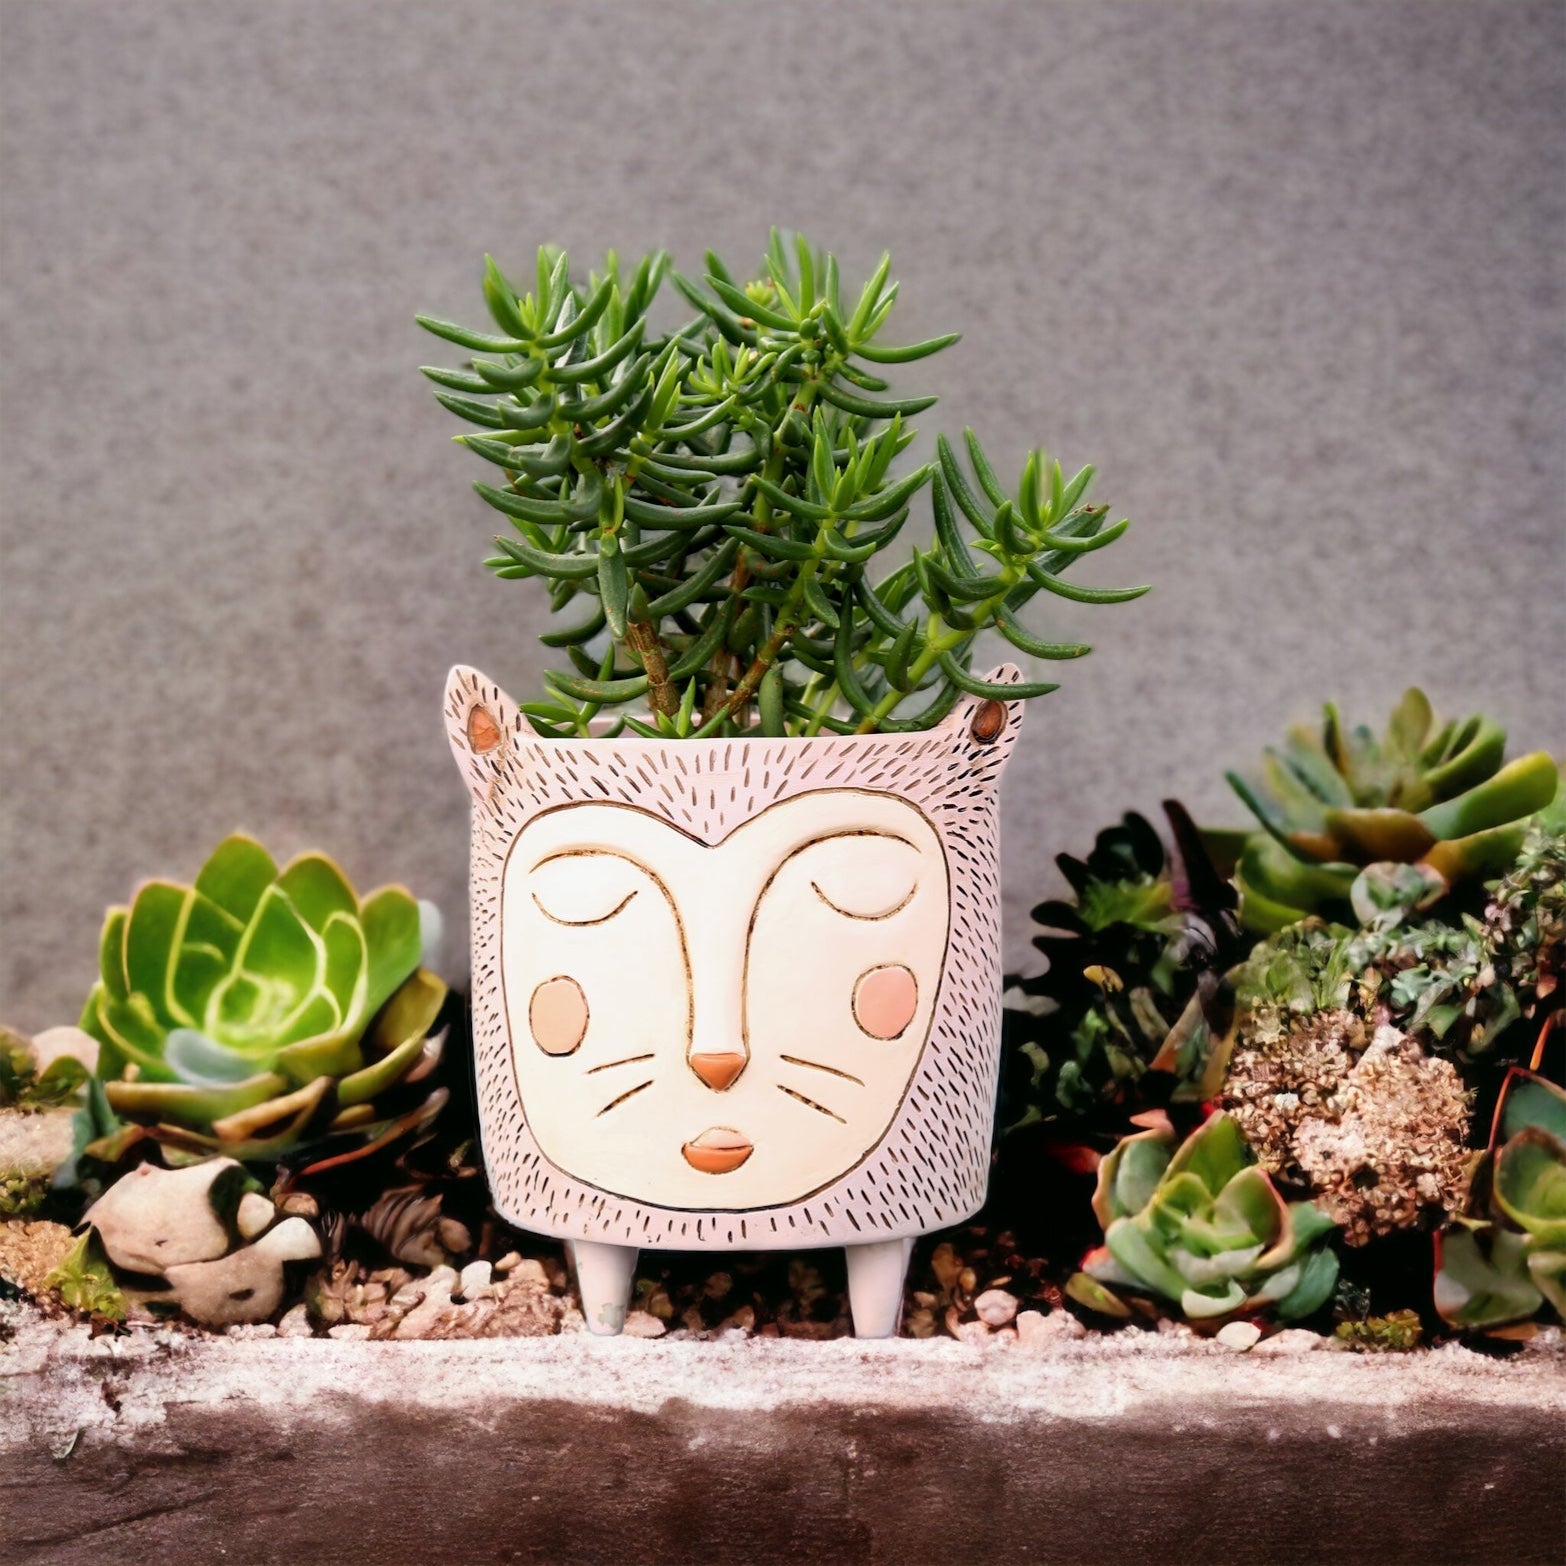 Pot Plant Planter Purrs Cat - The Renmy Store Homewares & Gifts 